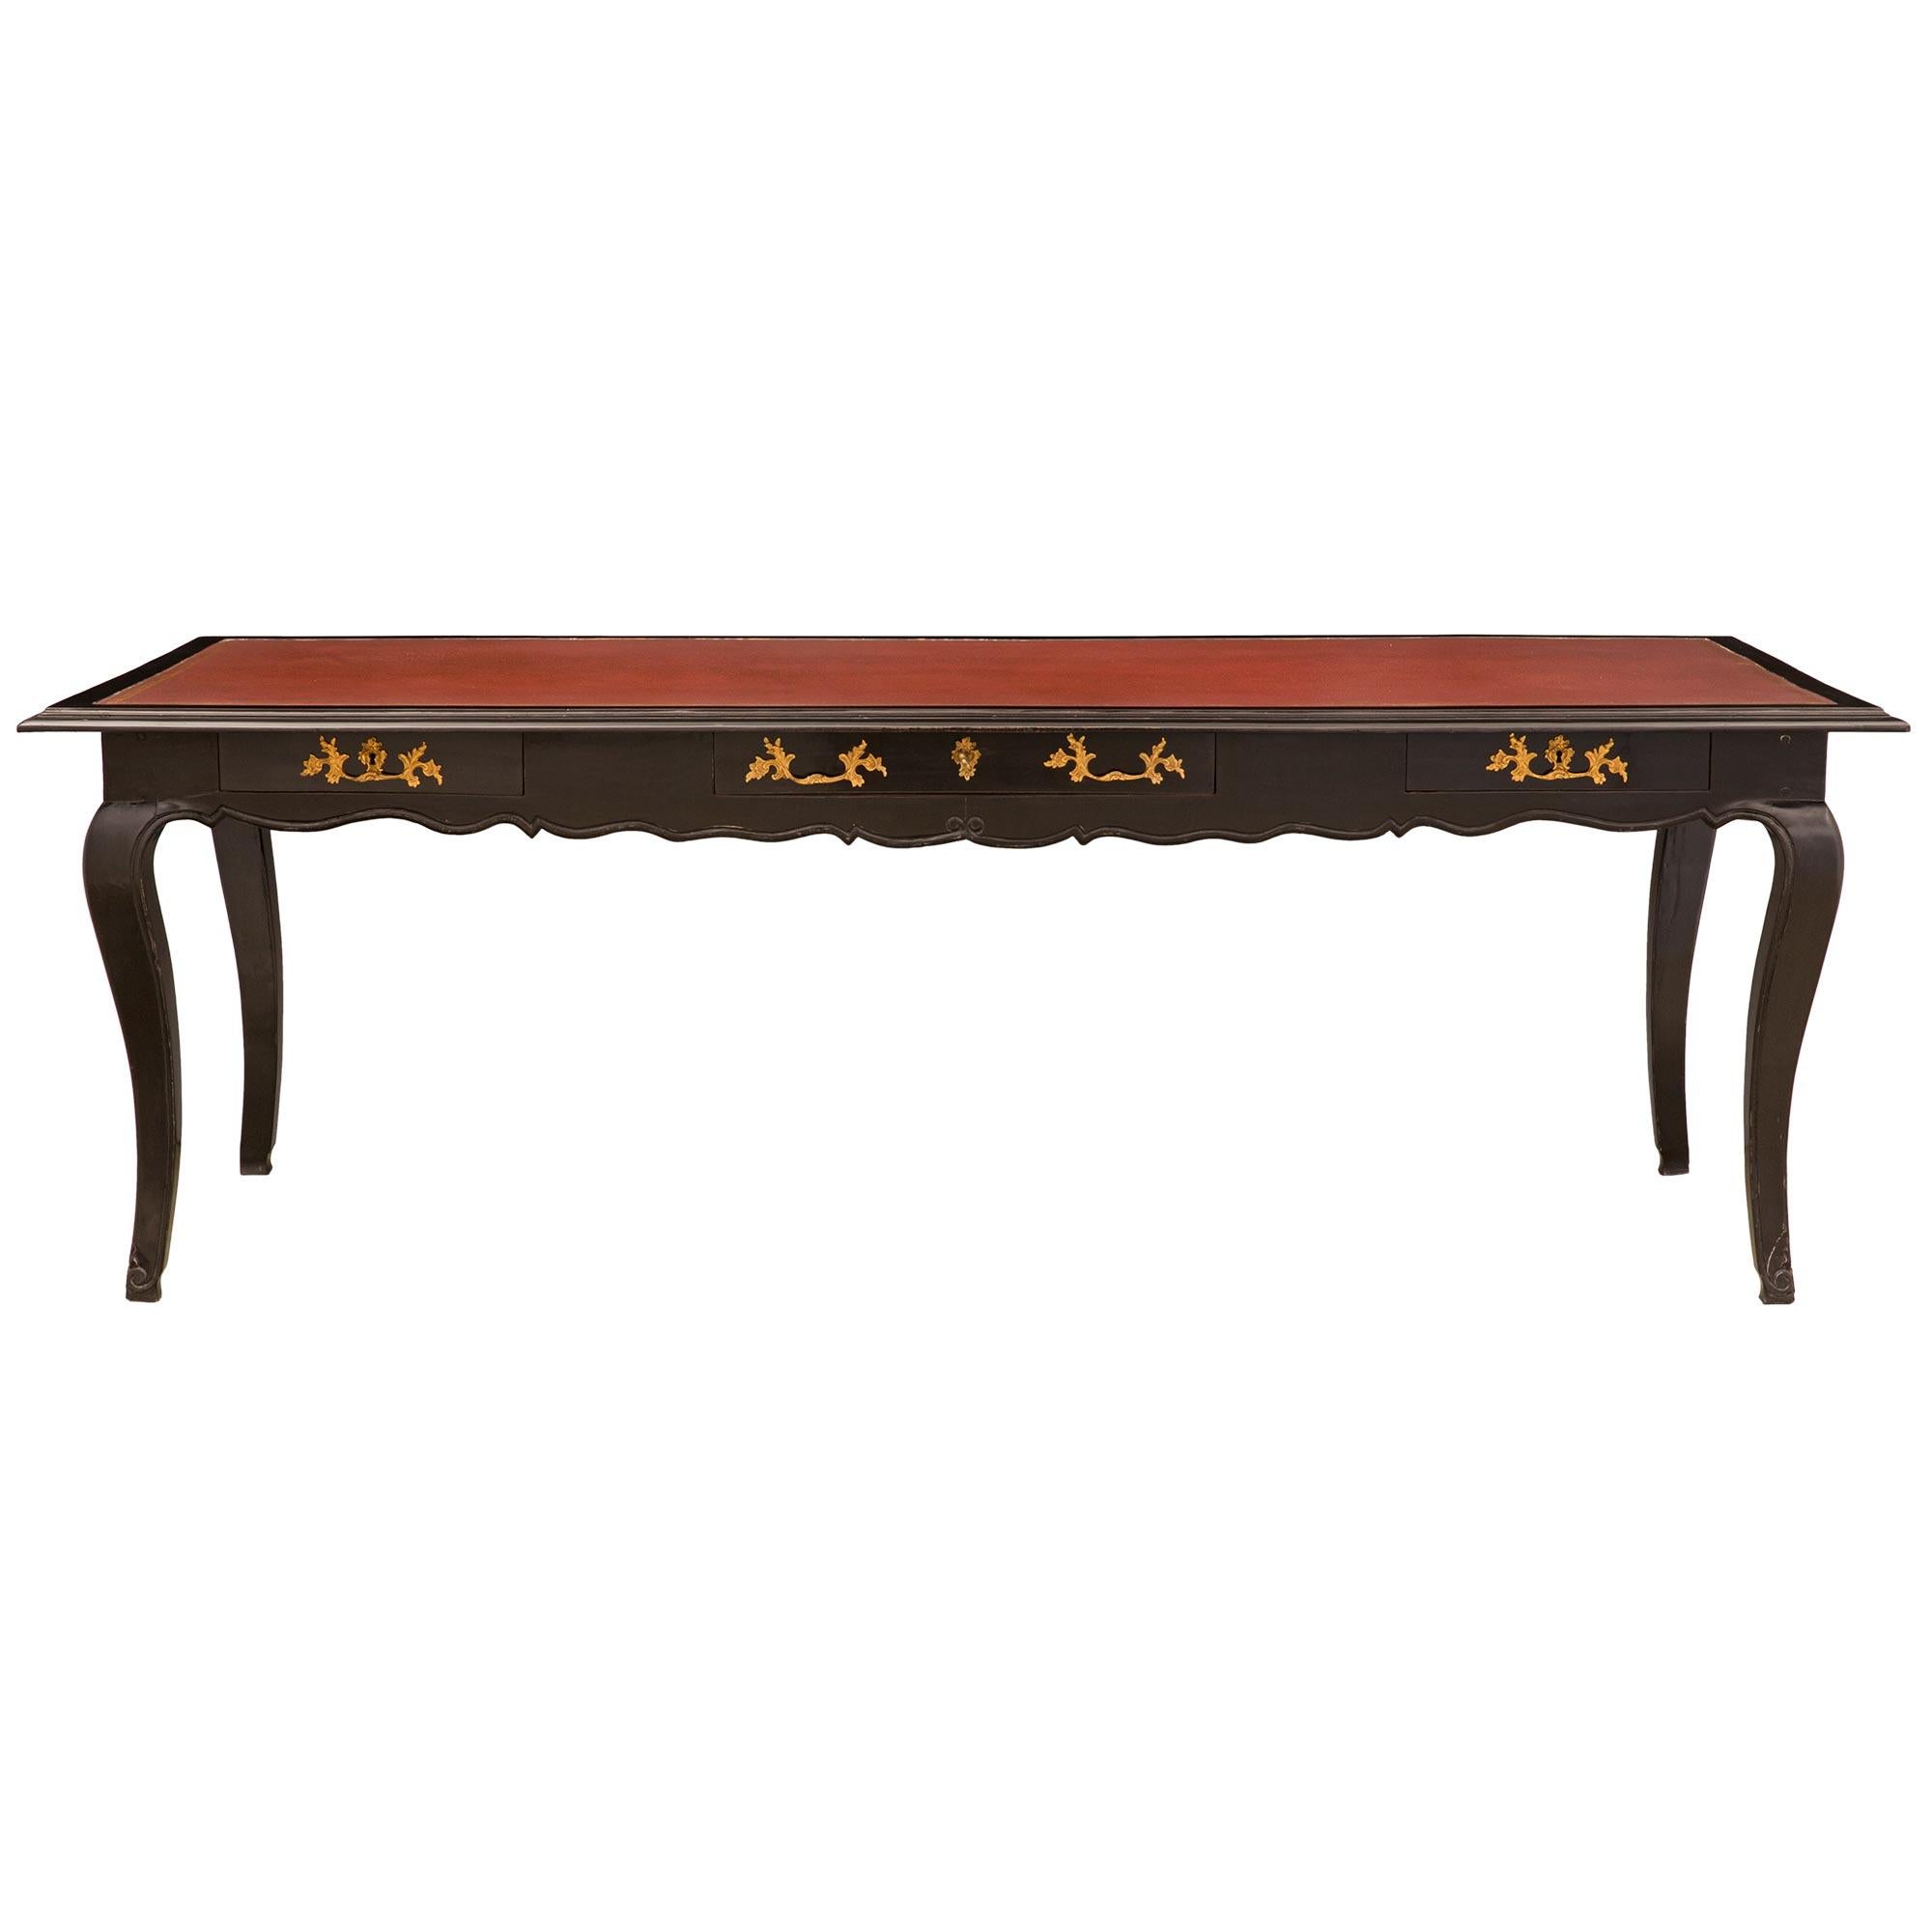 A striking and large-scale French 18th century Louis XV period ebonized fruitwood and ormolu library table/desk. The desk is raised by elegant cabriole legs with fine foliate feet and a lovely carved filet; which leads up each leg and extends along